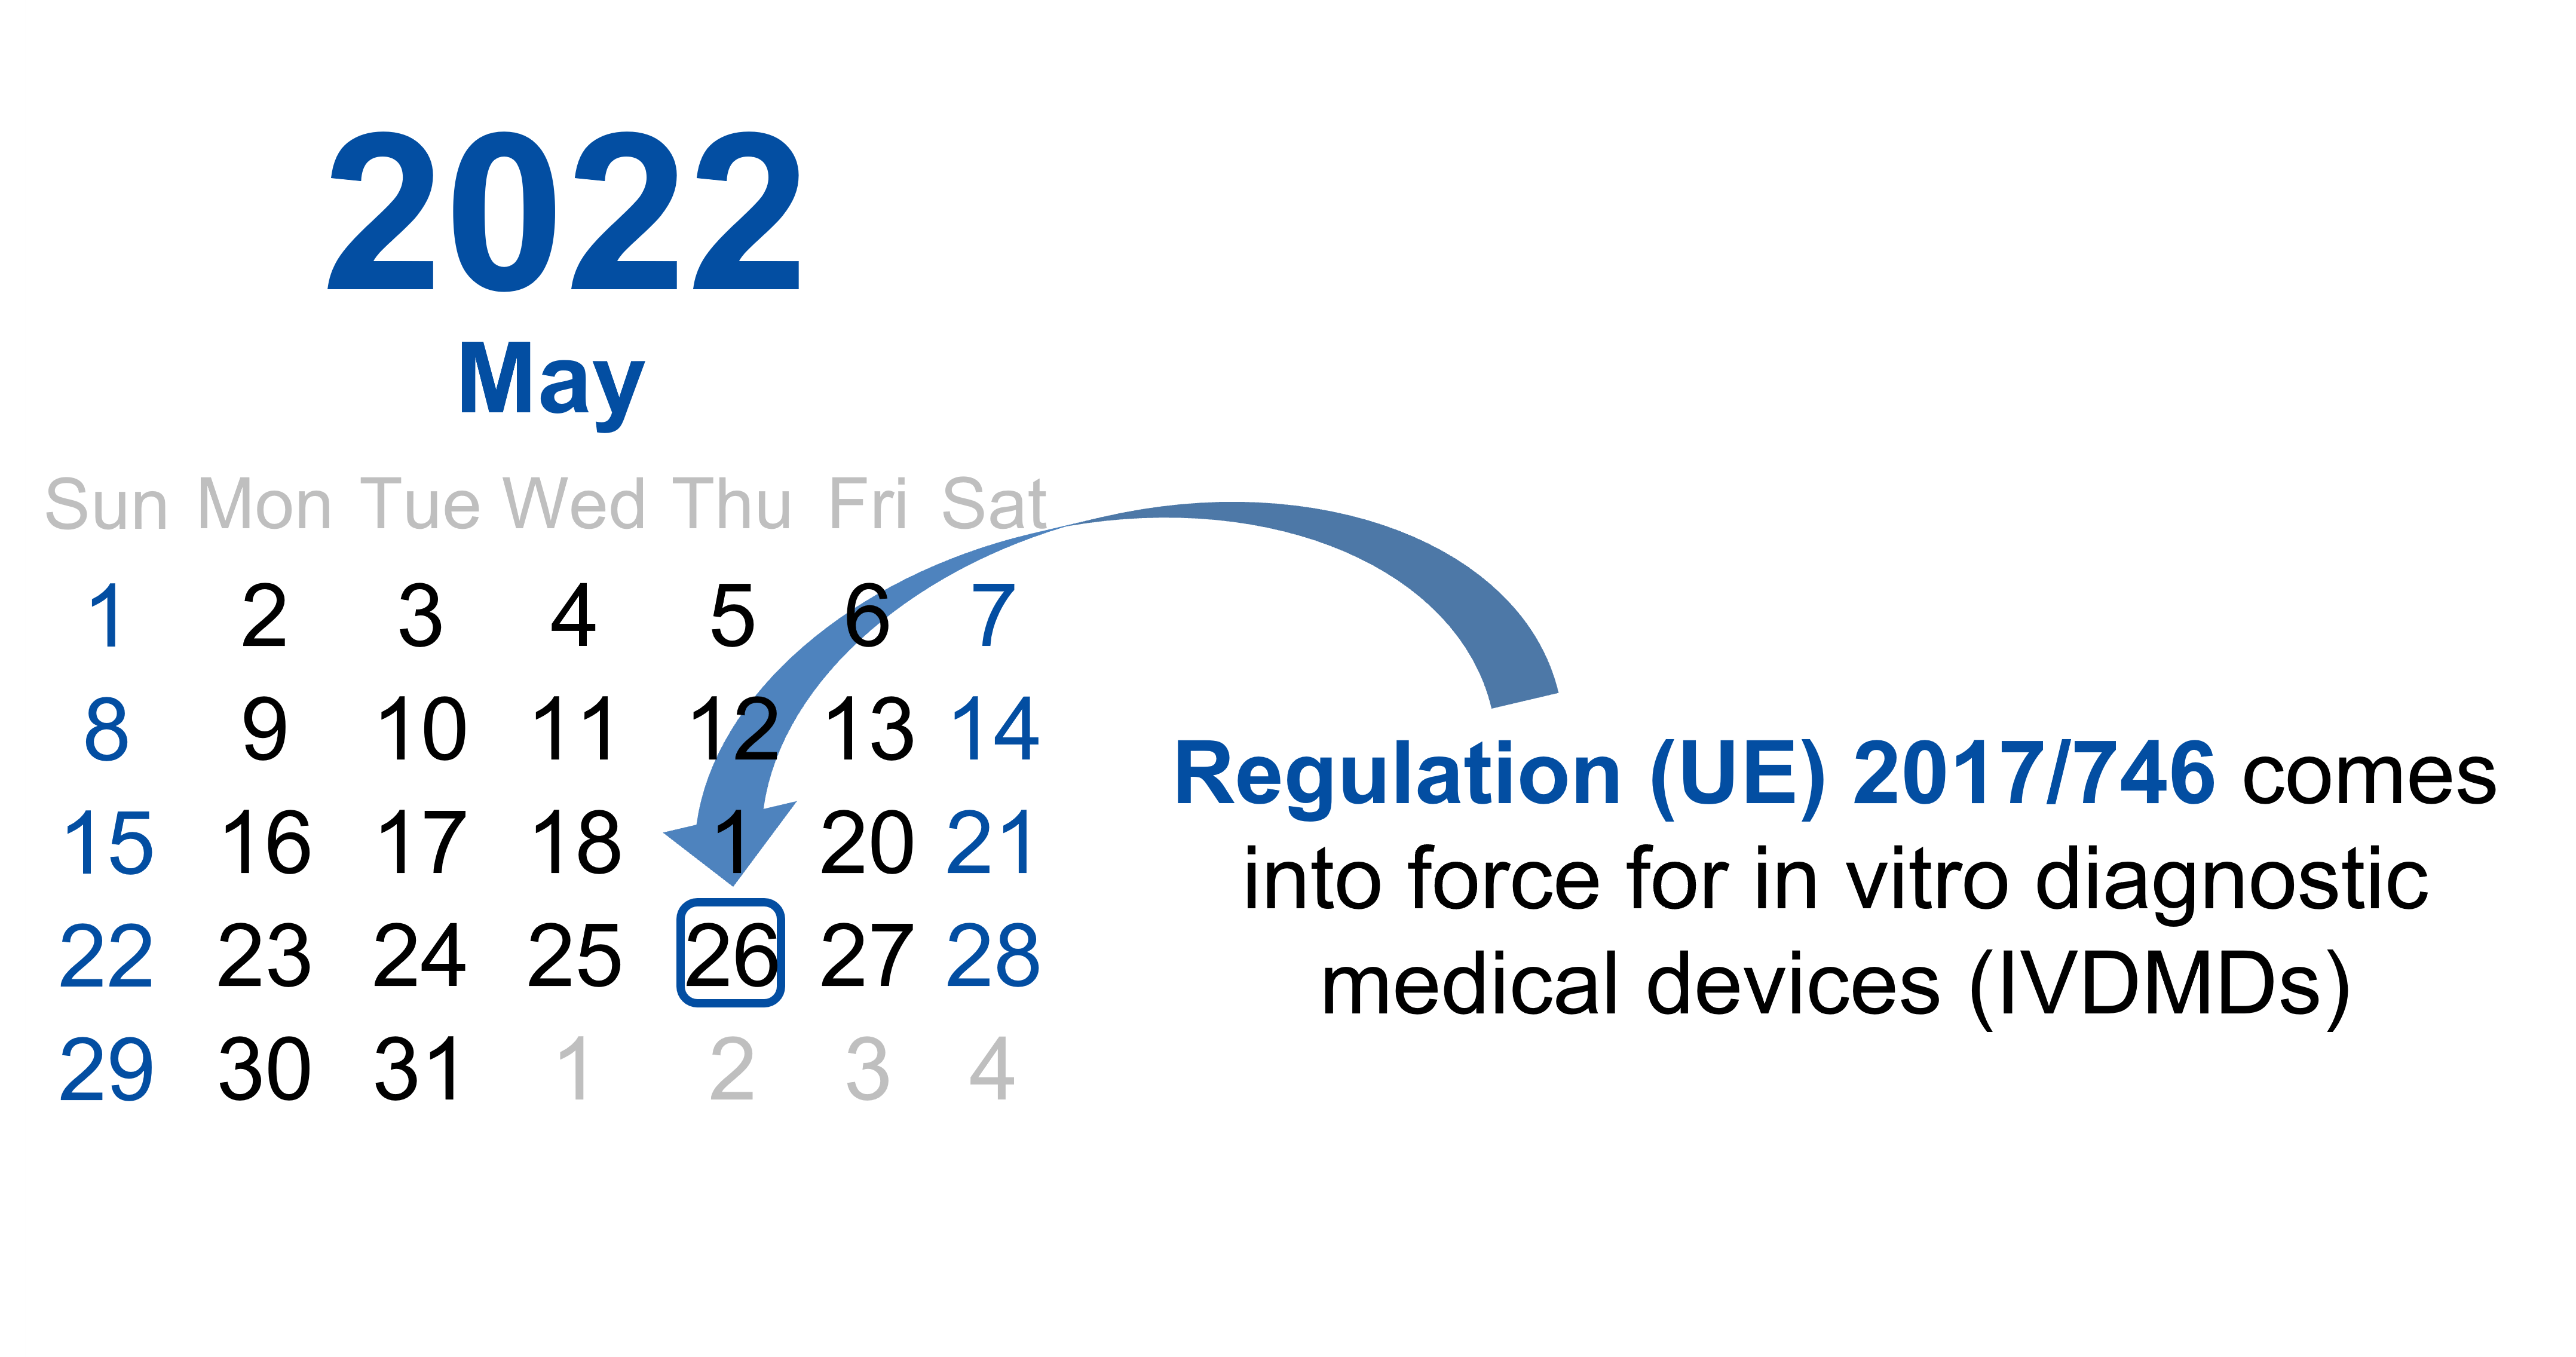 Regulation (EU) 2017/746 will come into force for in vitro diagnostic medical devices (IVDMDs) on May26, 2022